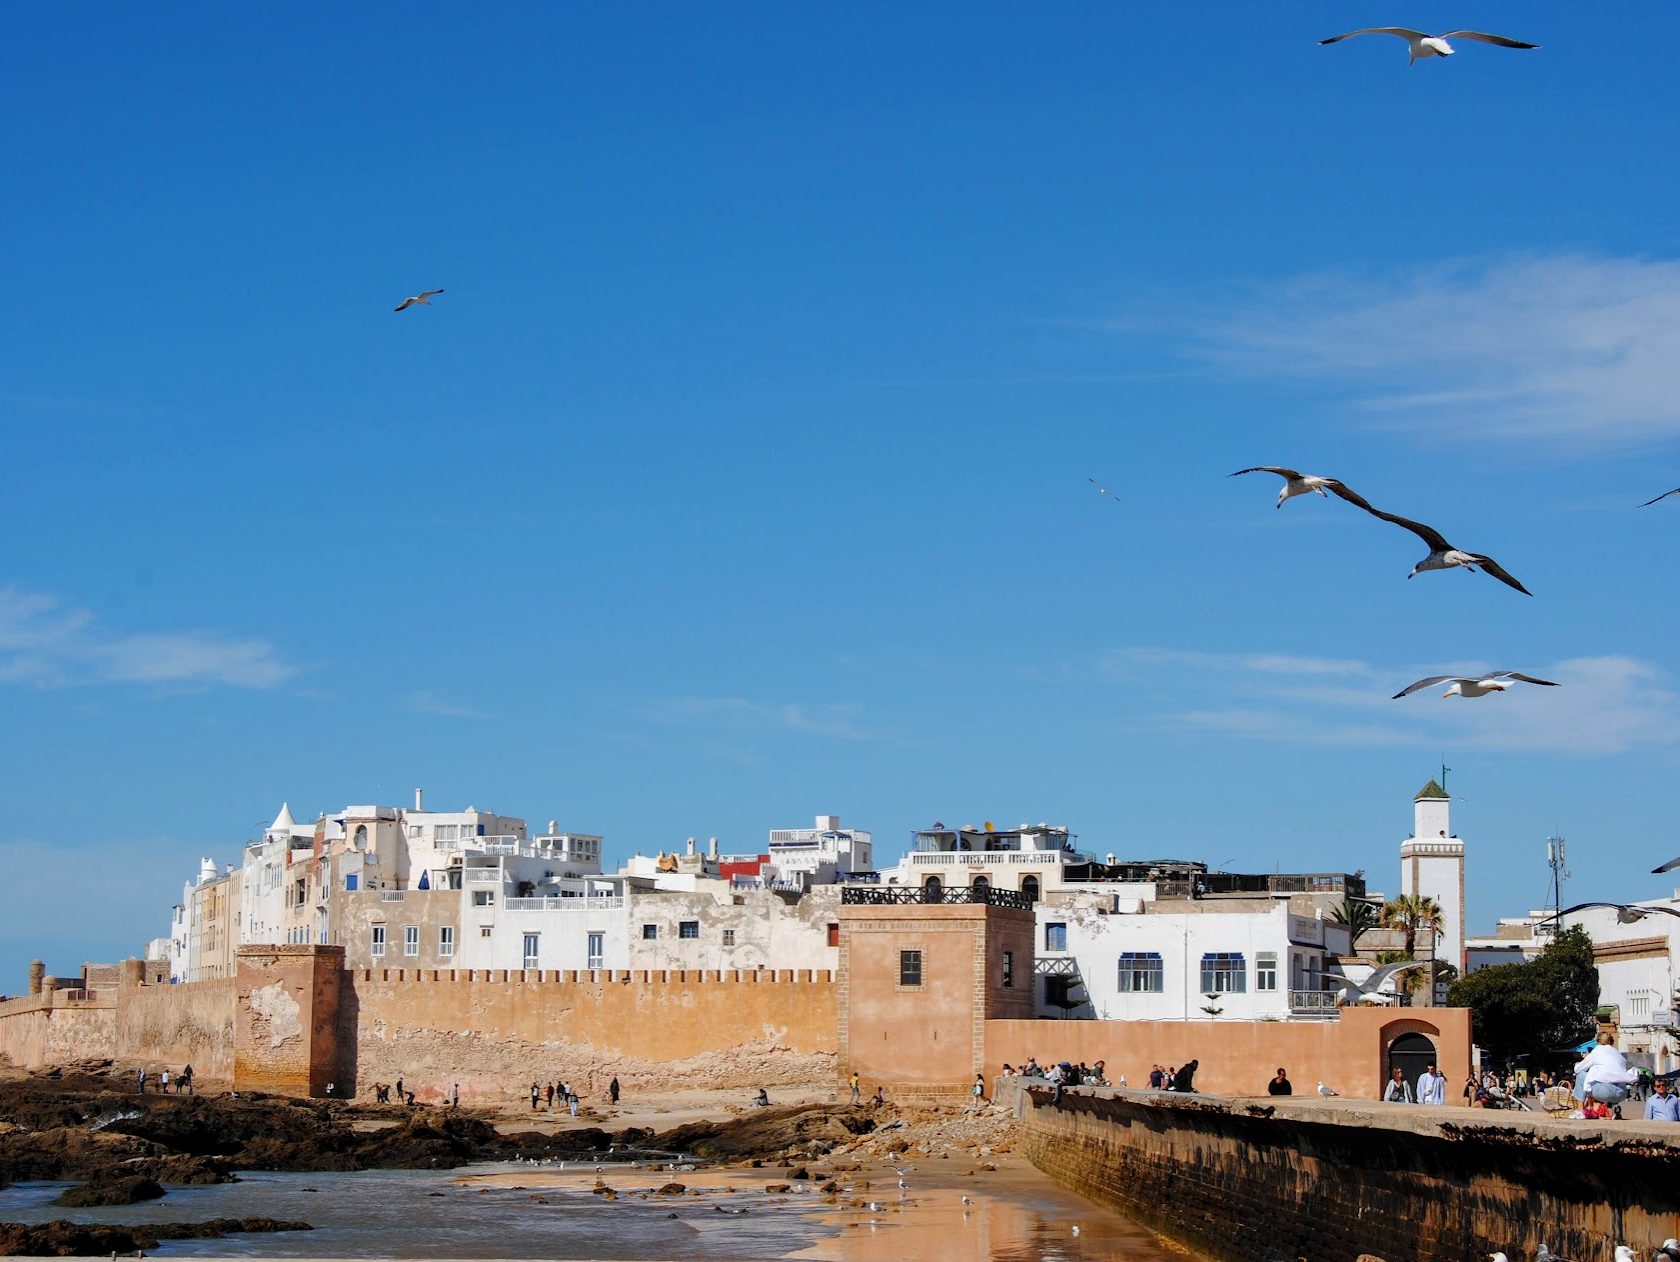 Essaouira, a walled town by the sea